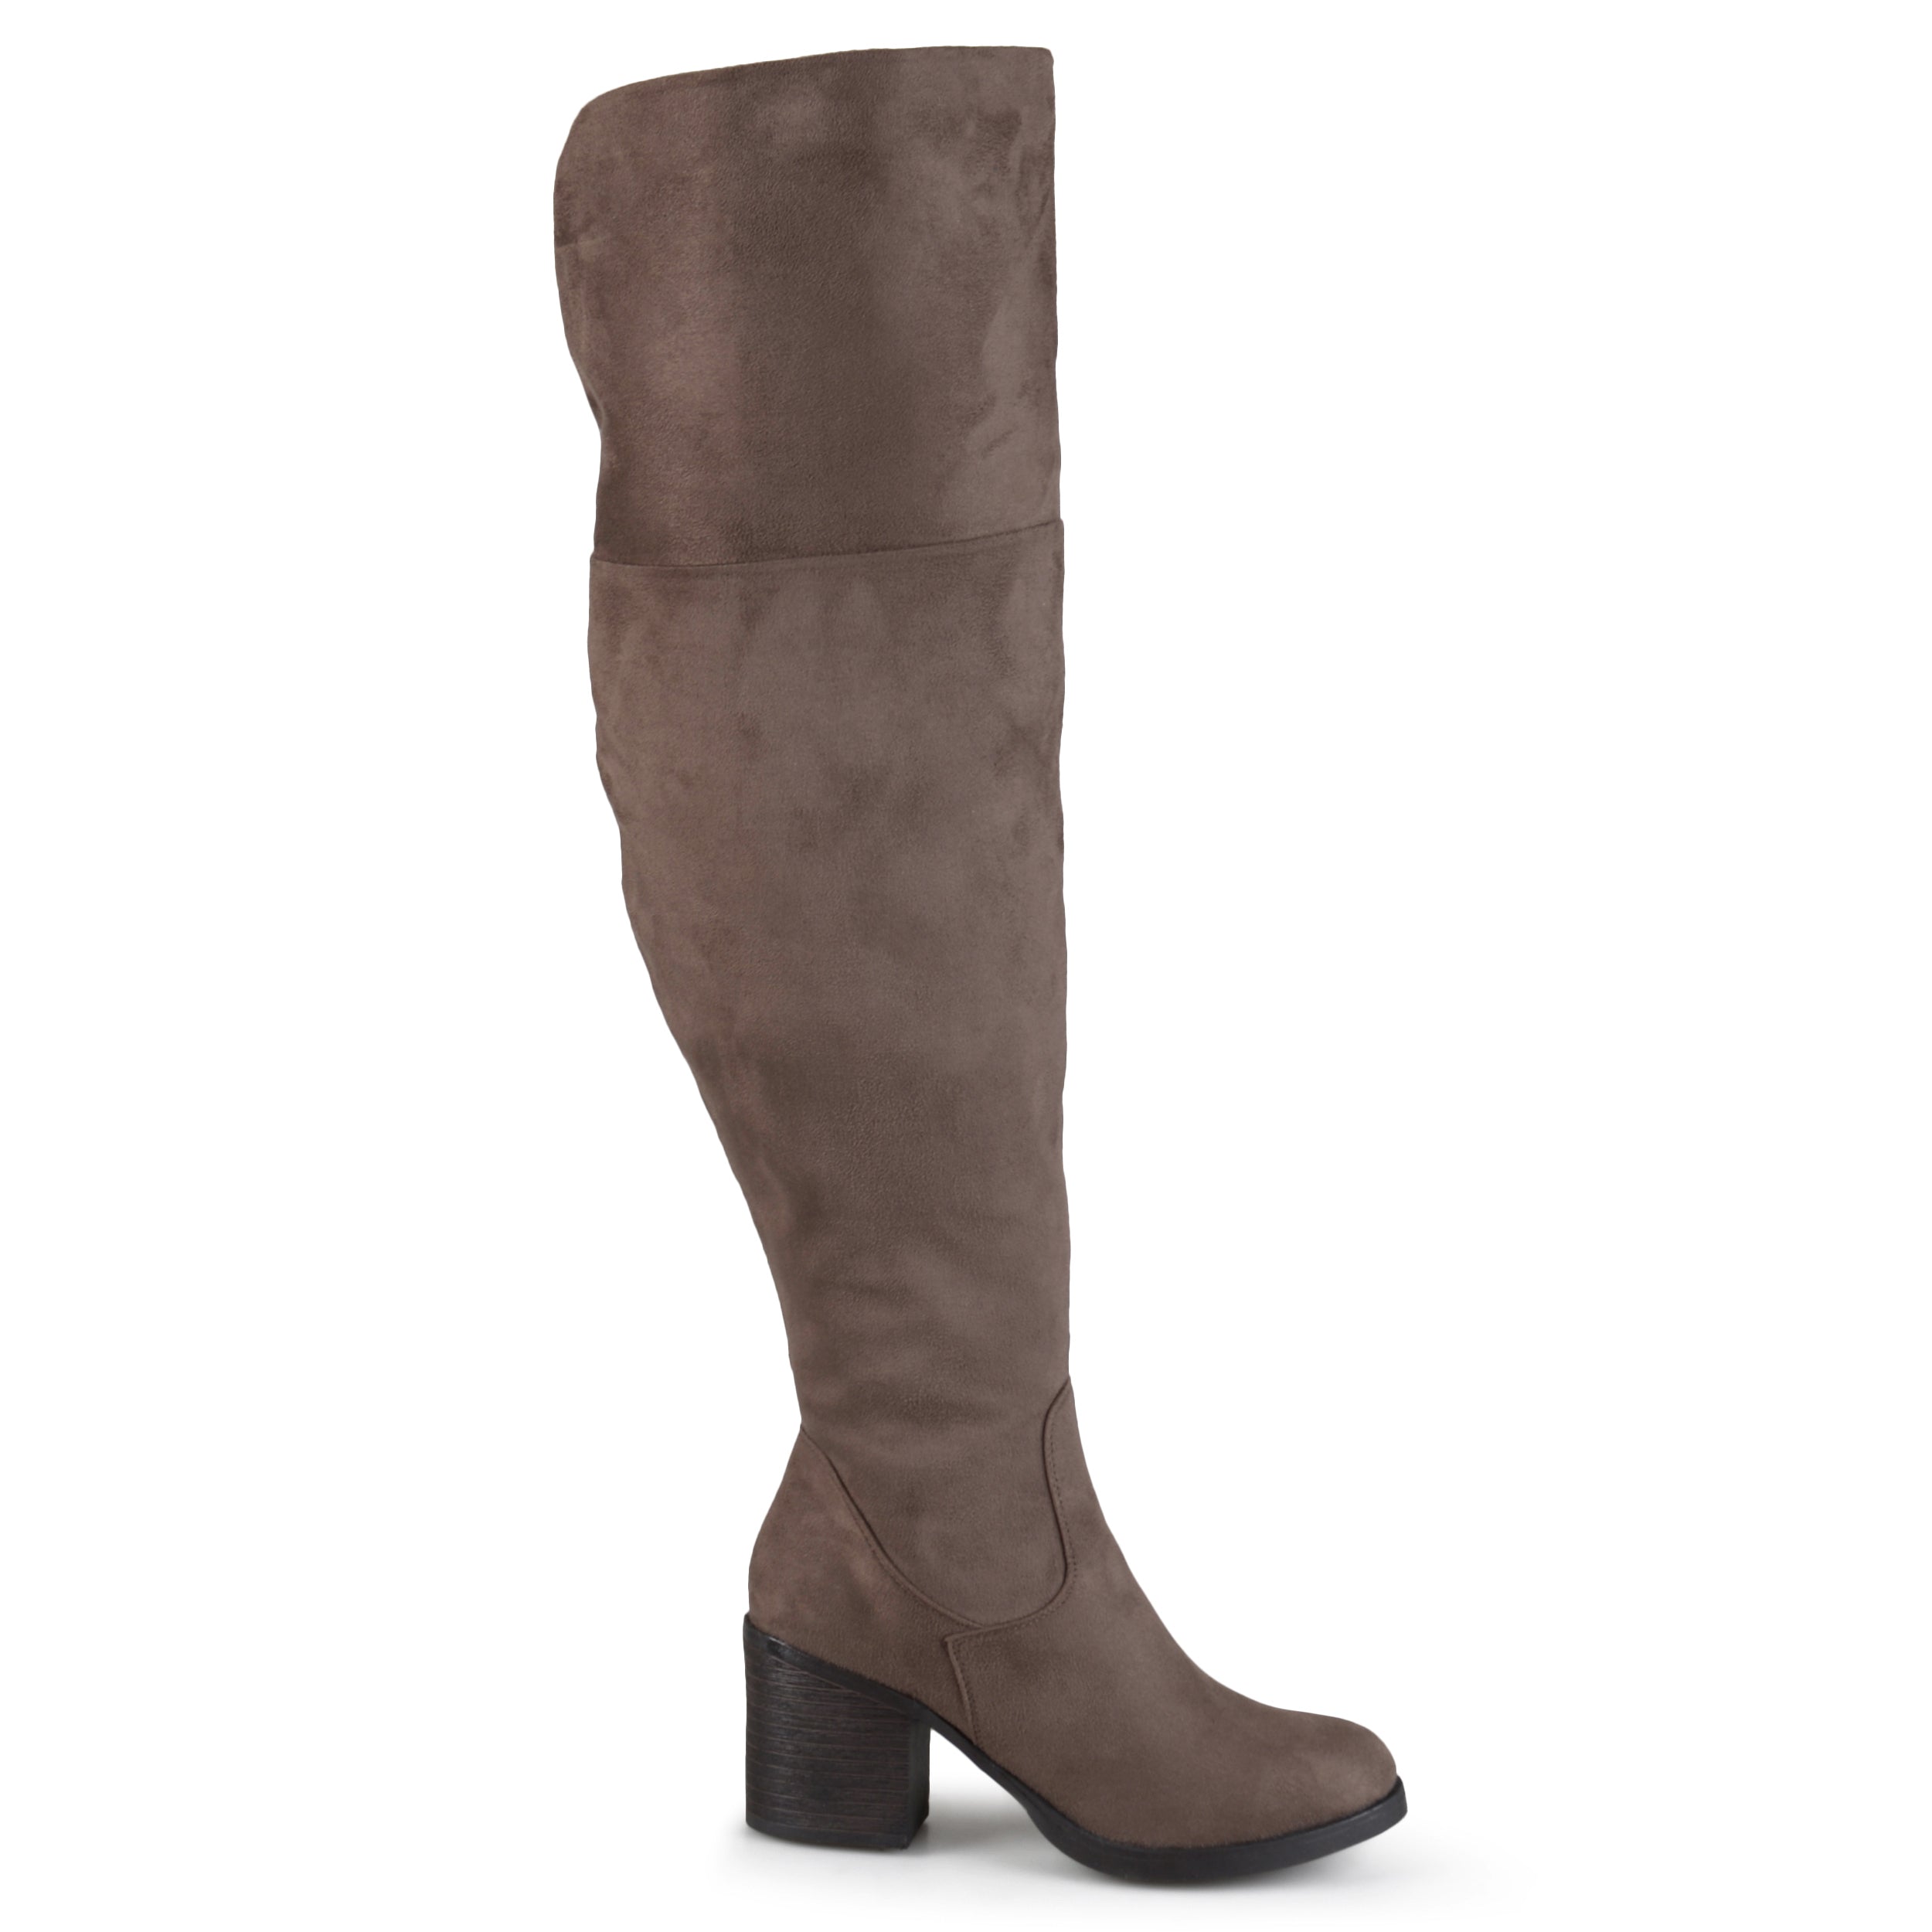 Sana Wide Calf Boot | Women's Over The Knee Boots | Journee Collection